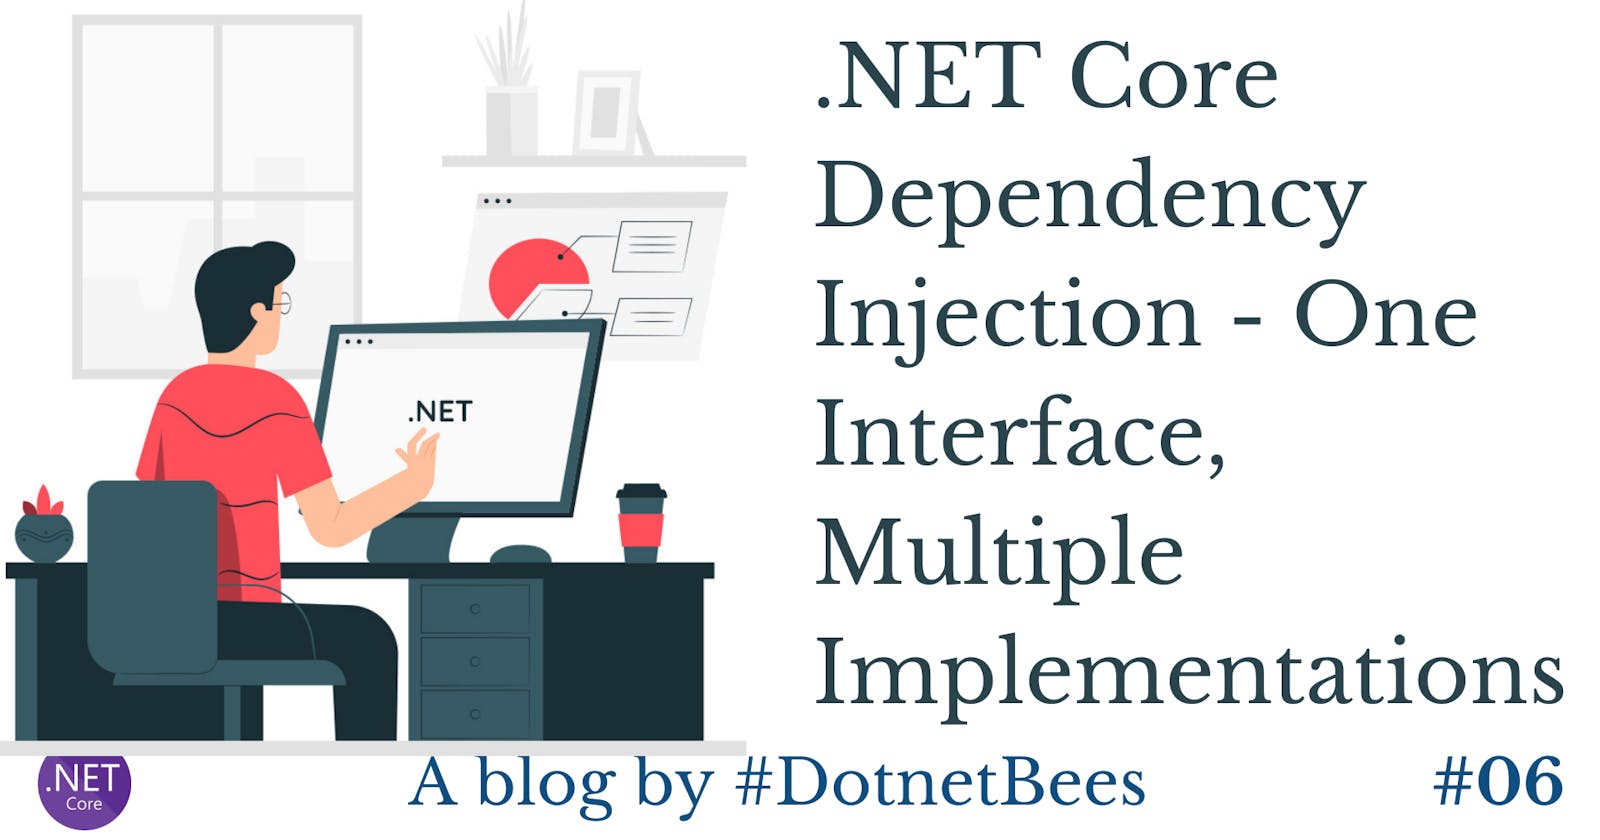 .NET Core Dependency Injection - One Interface, Multiple Implementations